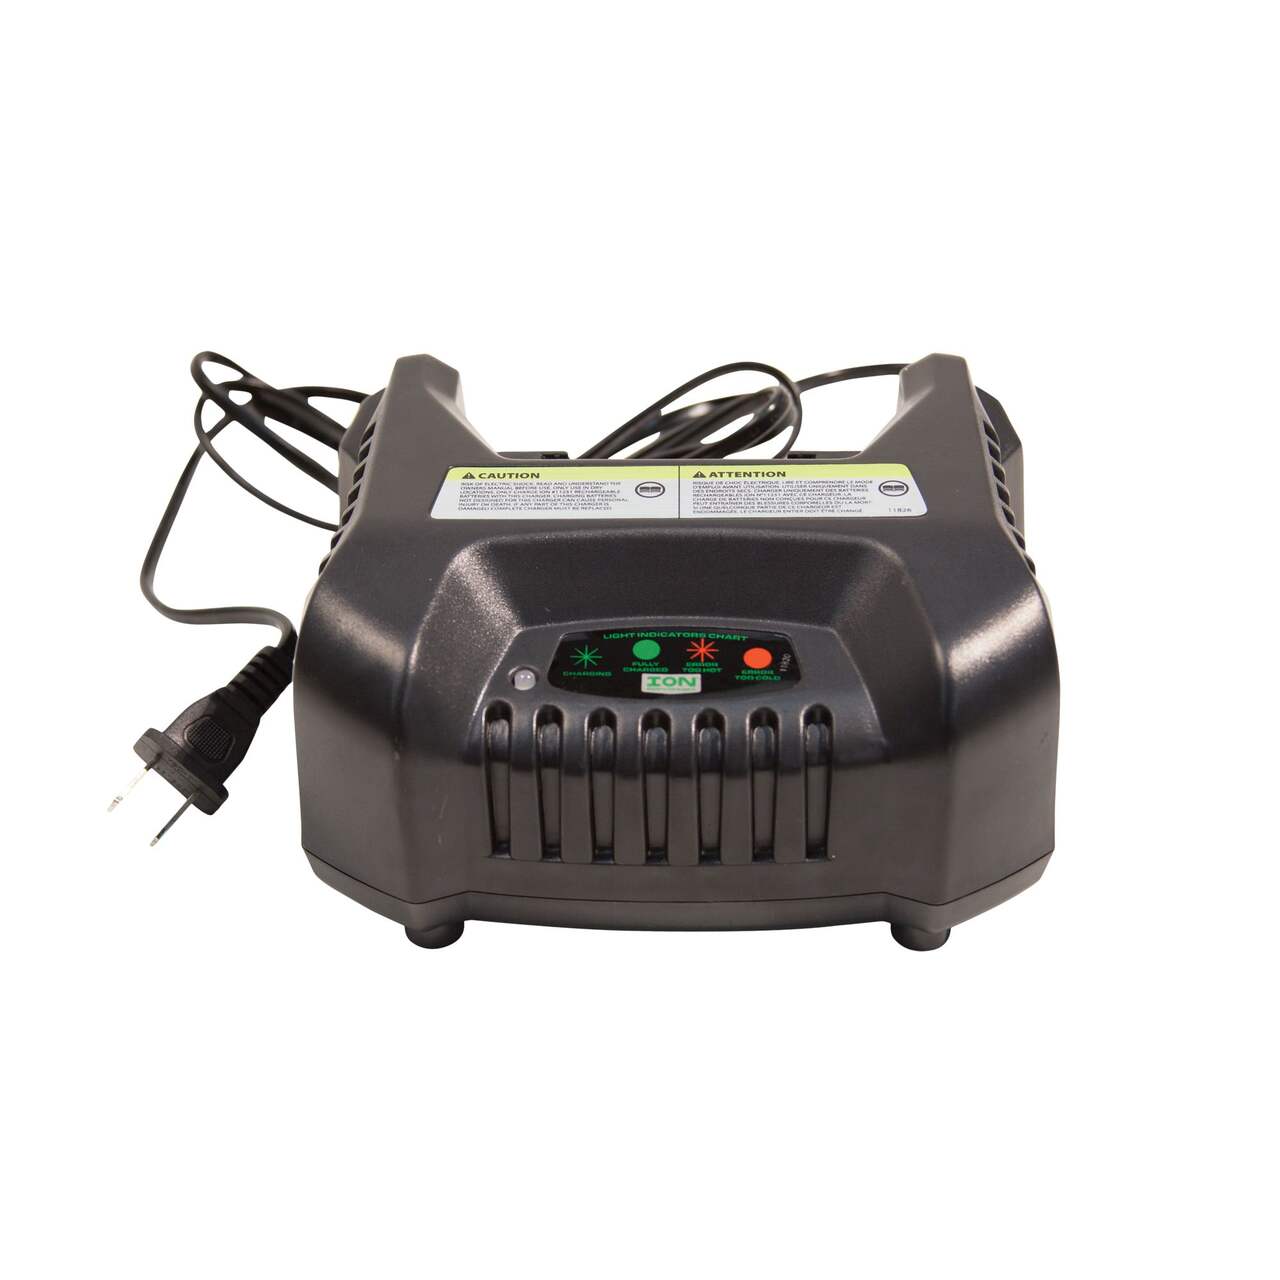 https://media-www.canadiantire.ca/product/playing/fishing/ice-fishing/0771881/ion-battery-charger-92934475-16d9-40cc-b51f-bccde93270ad-jpgrendition.jpg?imdensity=1&imwidth=1244&impolicy=mZoom